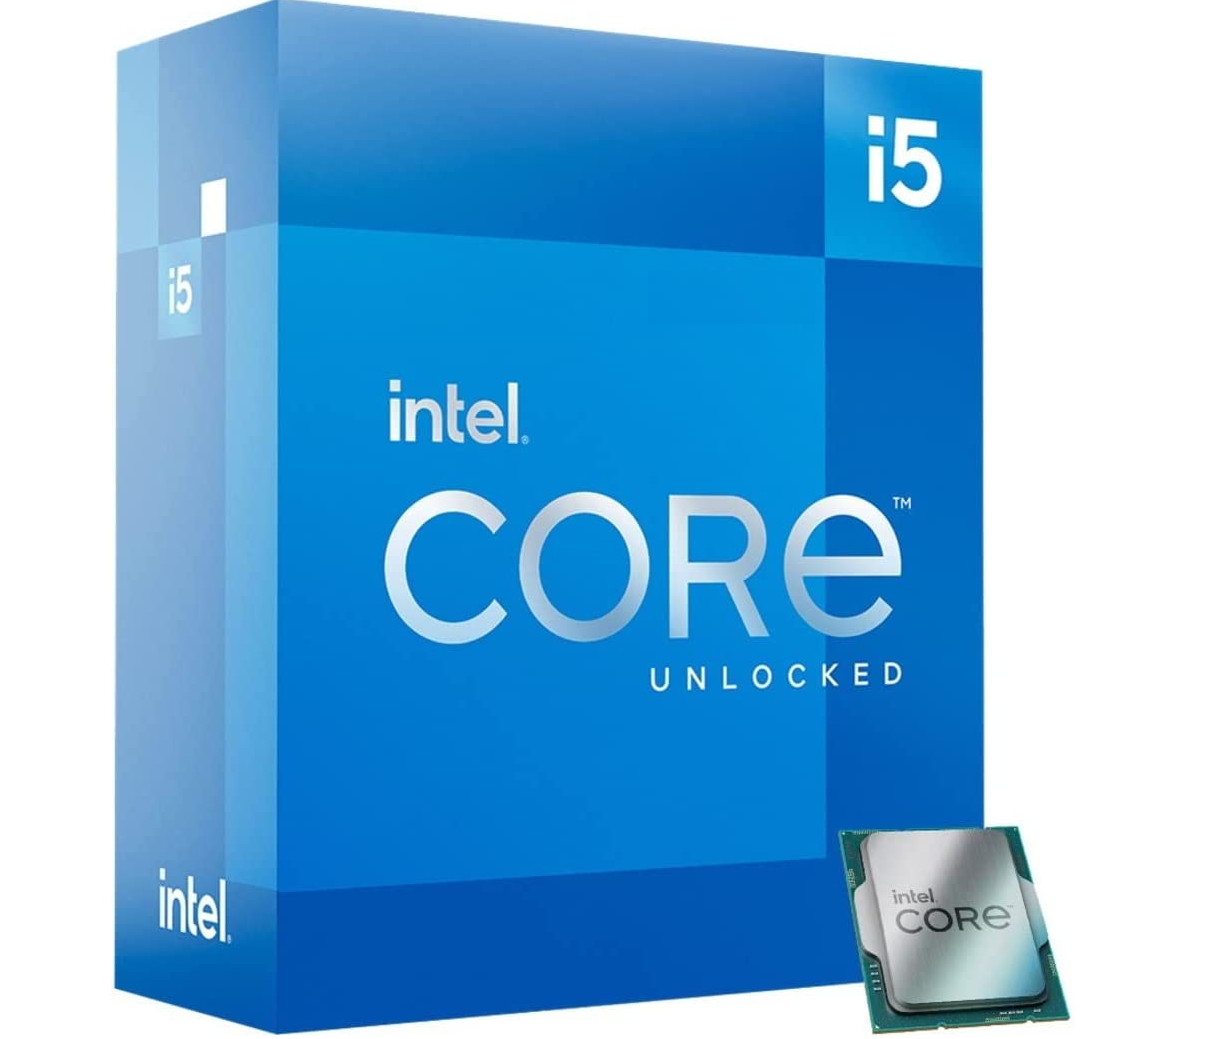 Intel Core i5-13500 and Core i5-13400 punch above their weight 